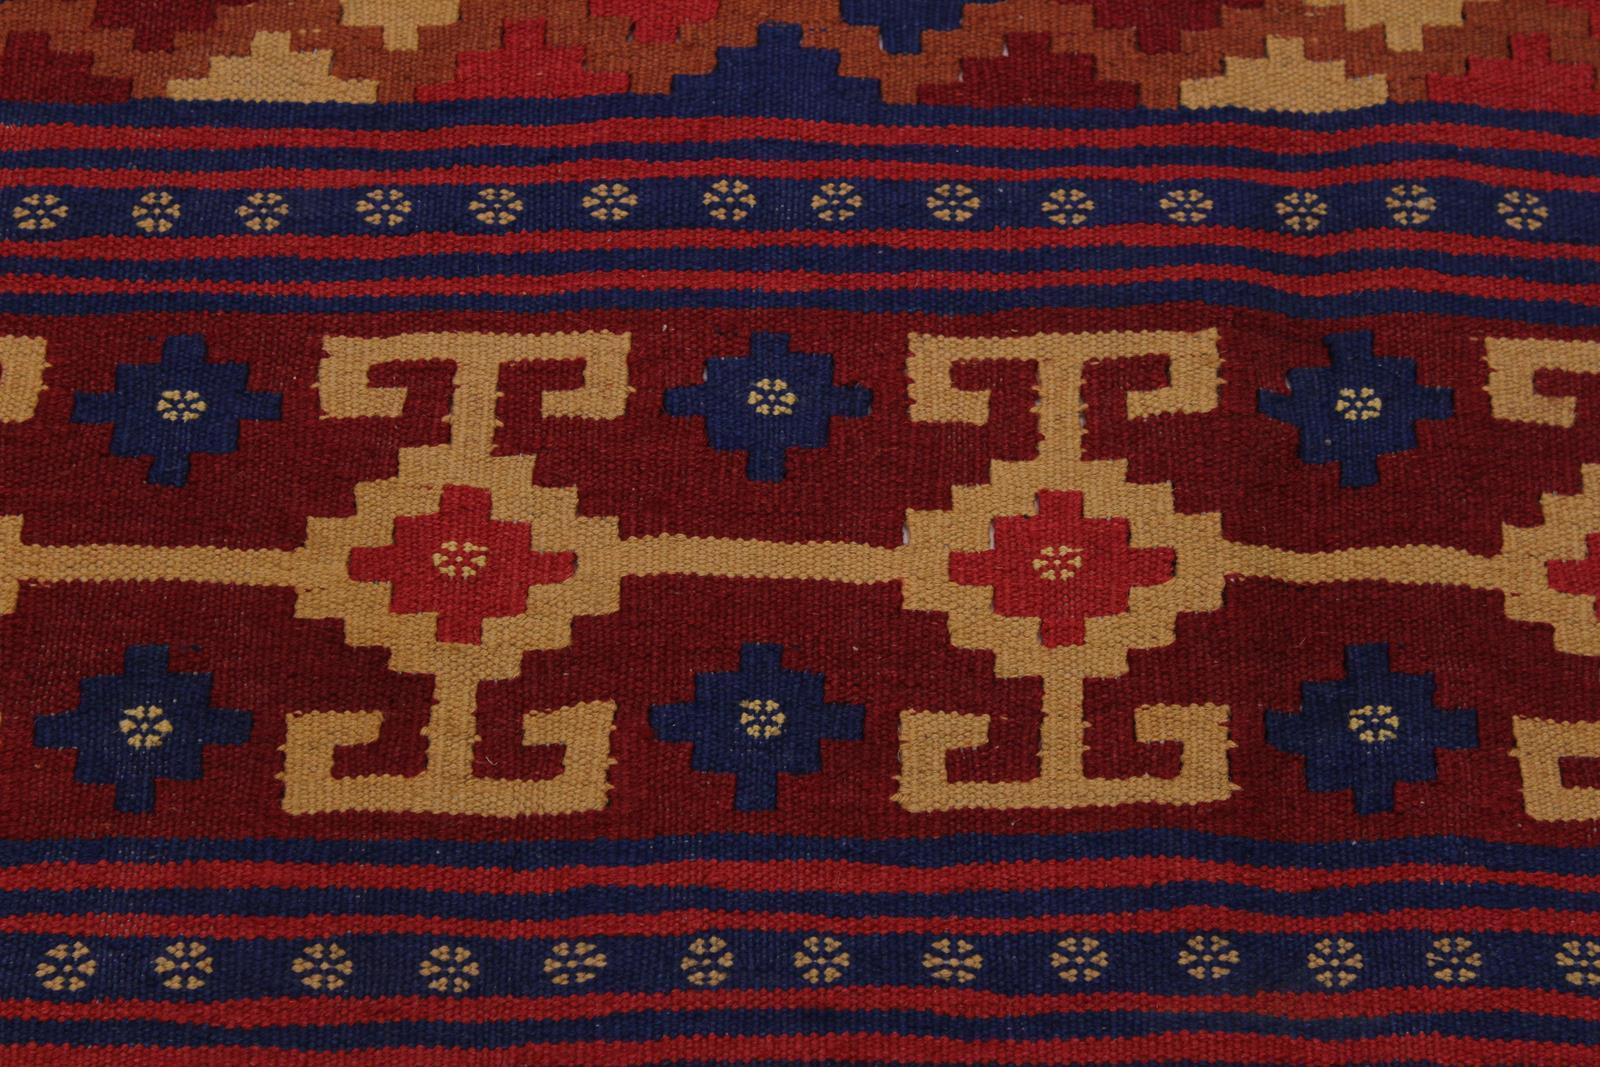 A10656, 410"x 6 7",Geometric                     ,5x7,Red,BLUE,Hand-woven                    ,Afghanistan,100% Wool  ,Rectangle  ,652671197734